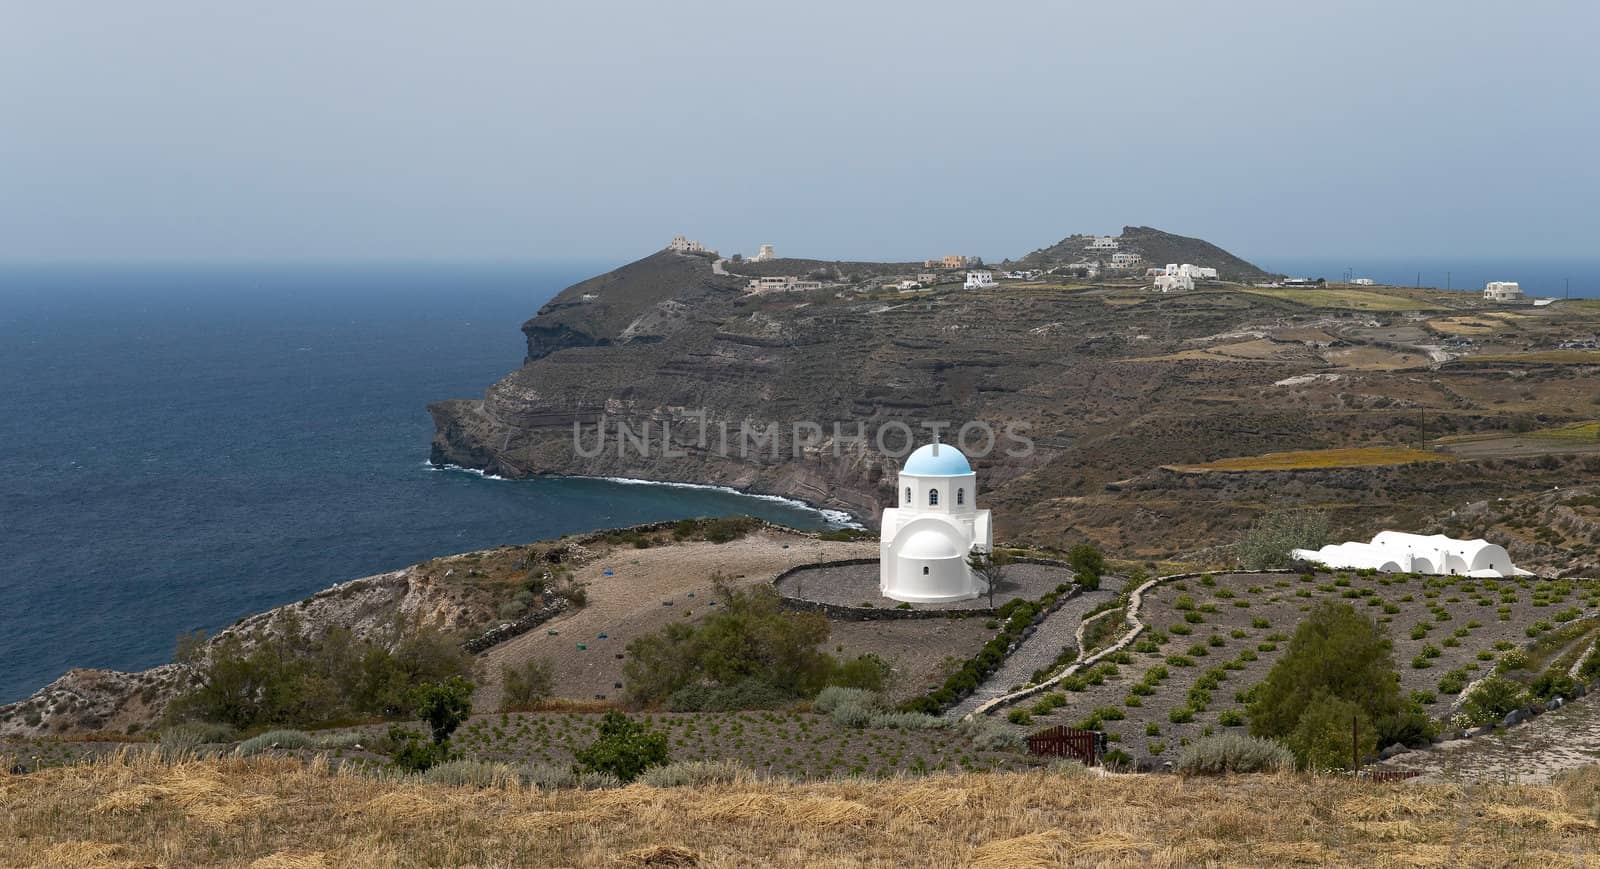 Lonely white church with blue cupola next to the sea